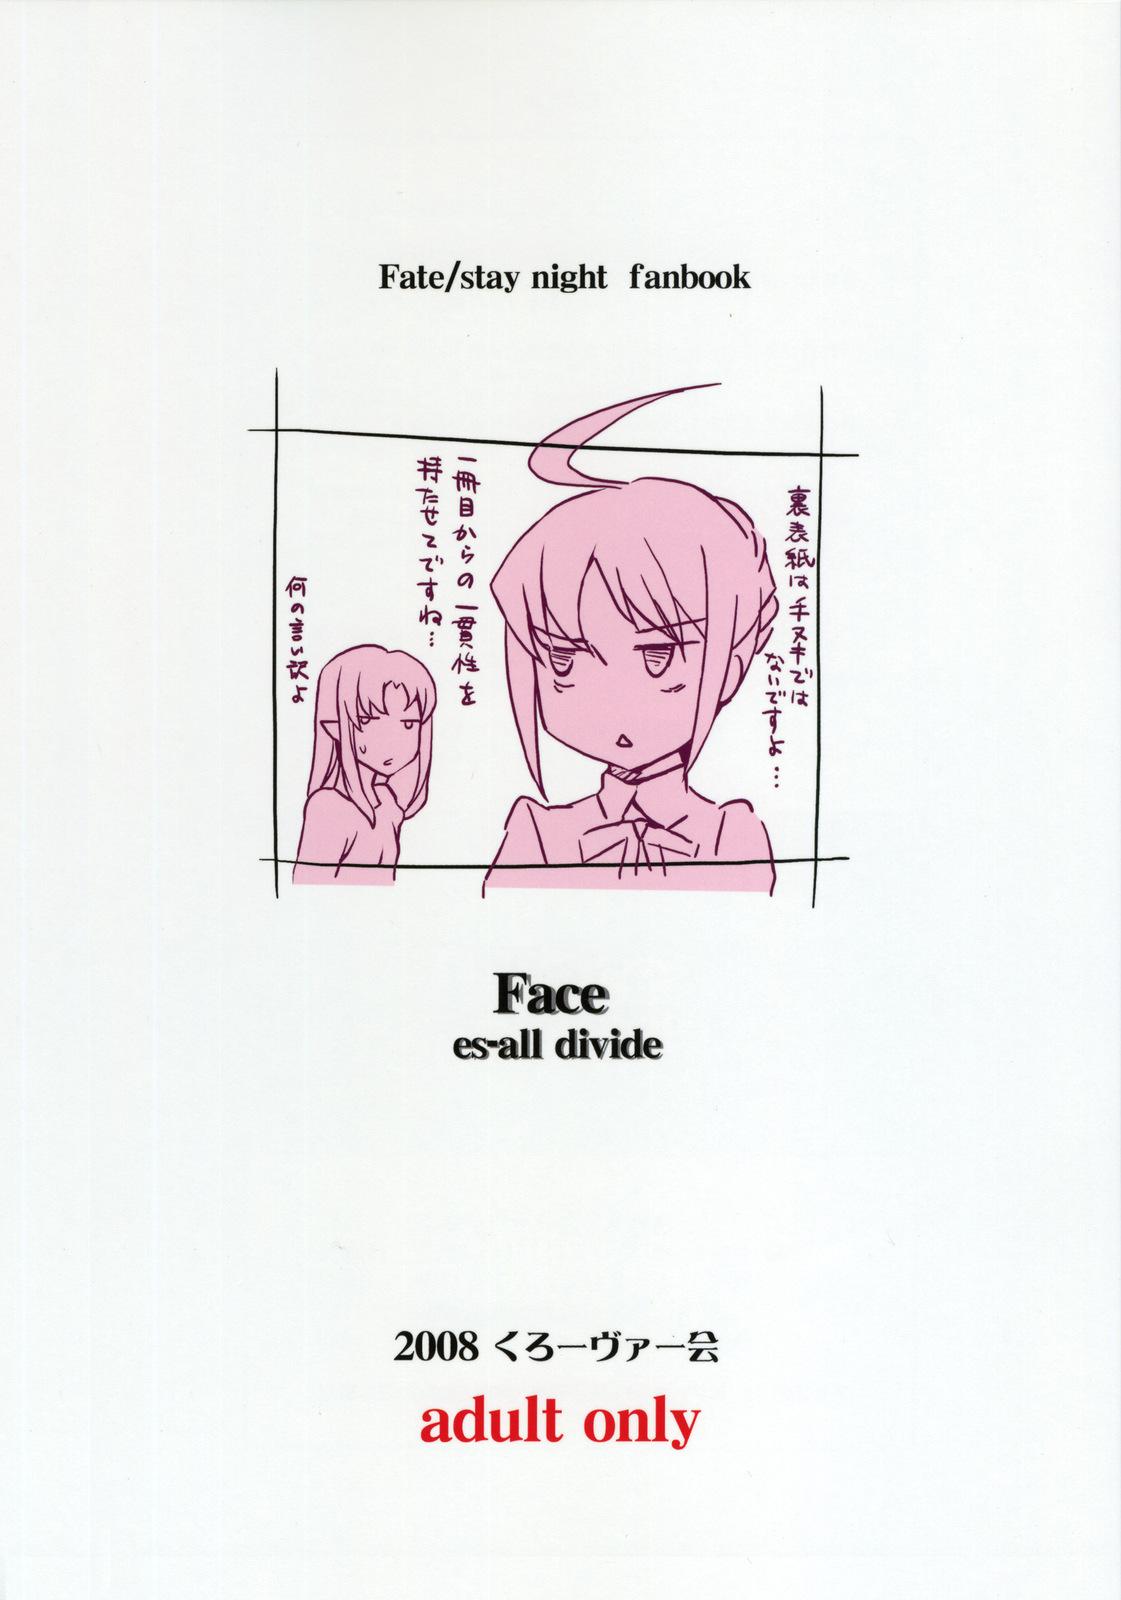 Hardcore Porn Free Face es-all divide - Fate stay night Freaky - Page 144